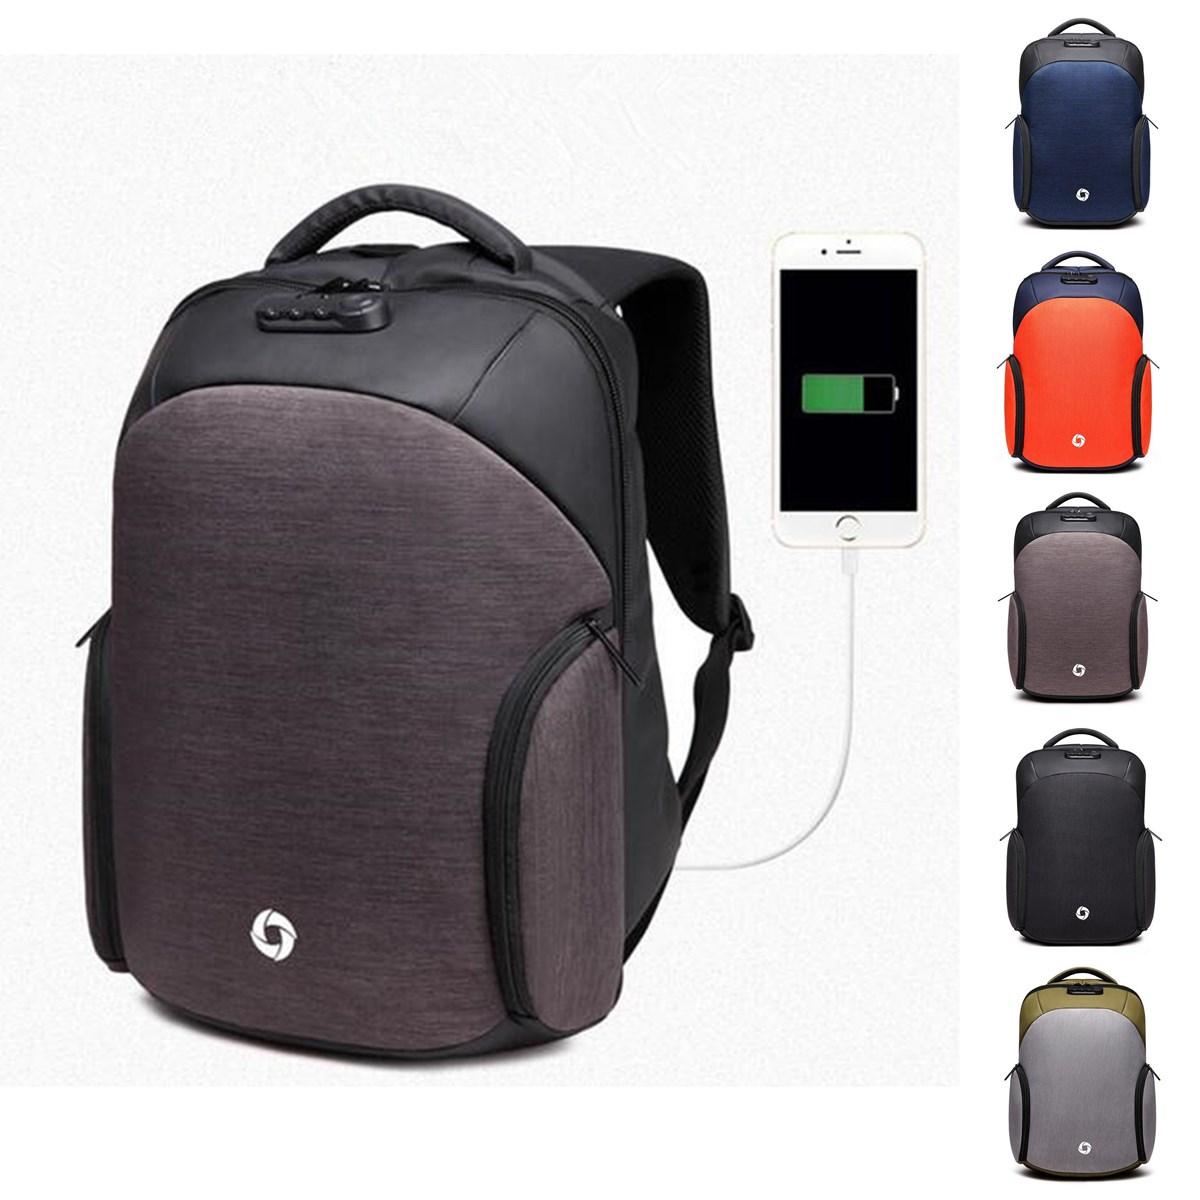  USB Charge Anti-theft Backpack Laptop Mens Backpacks Outdoor Travel Business Bag School Bags